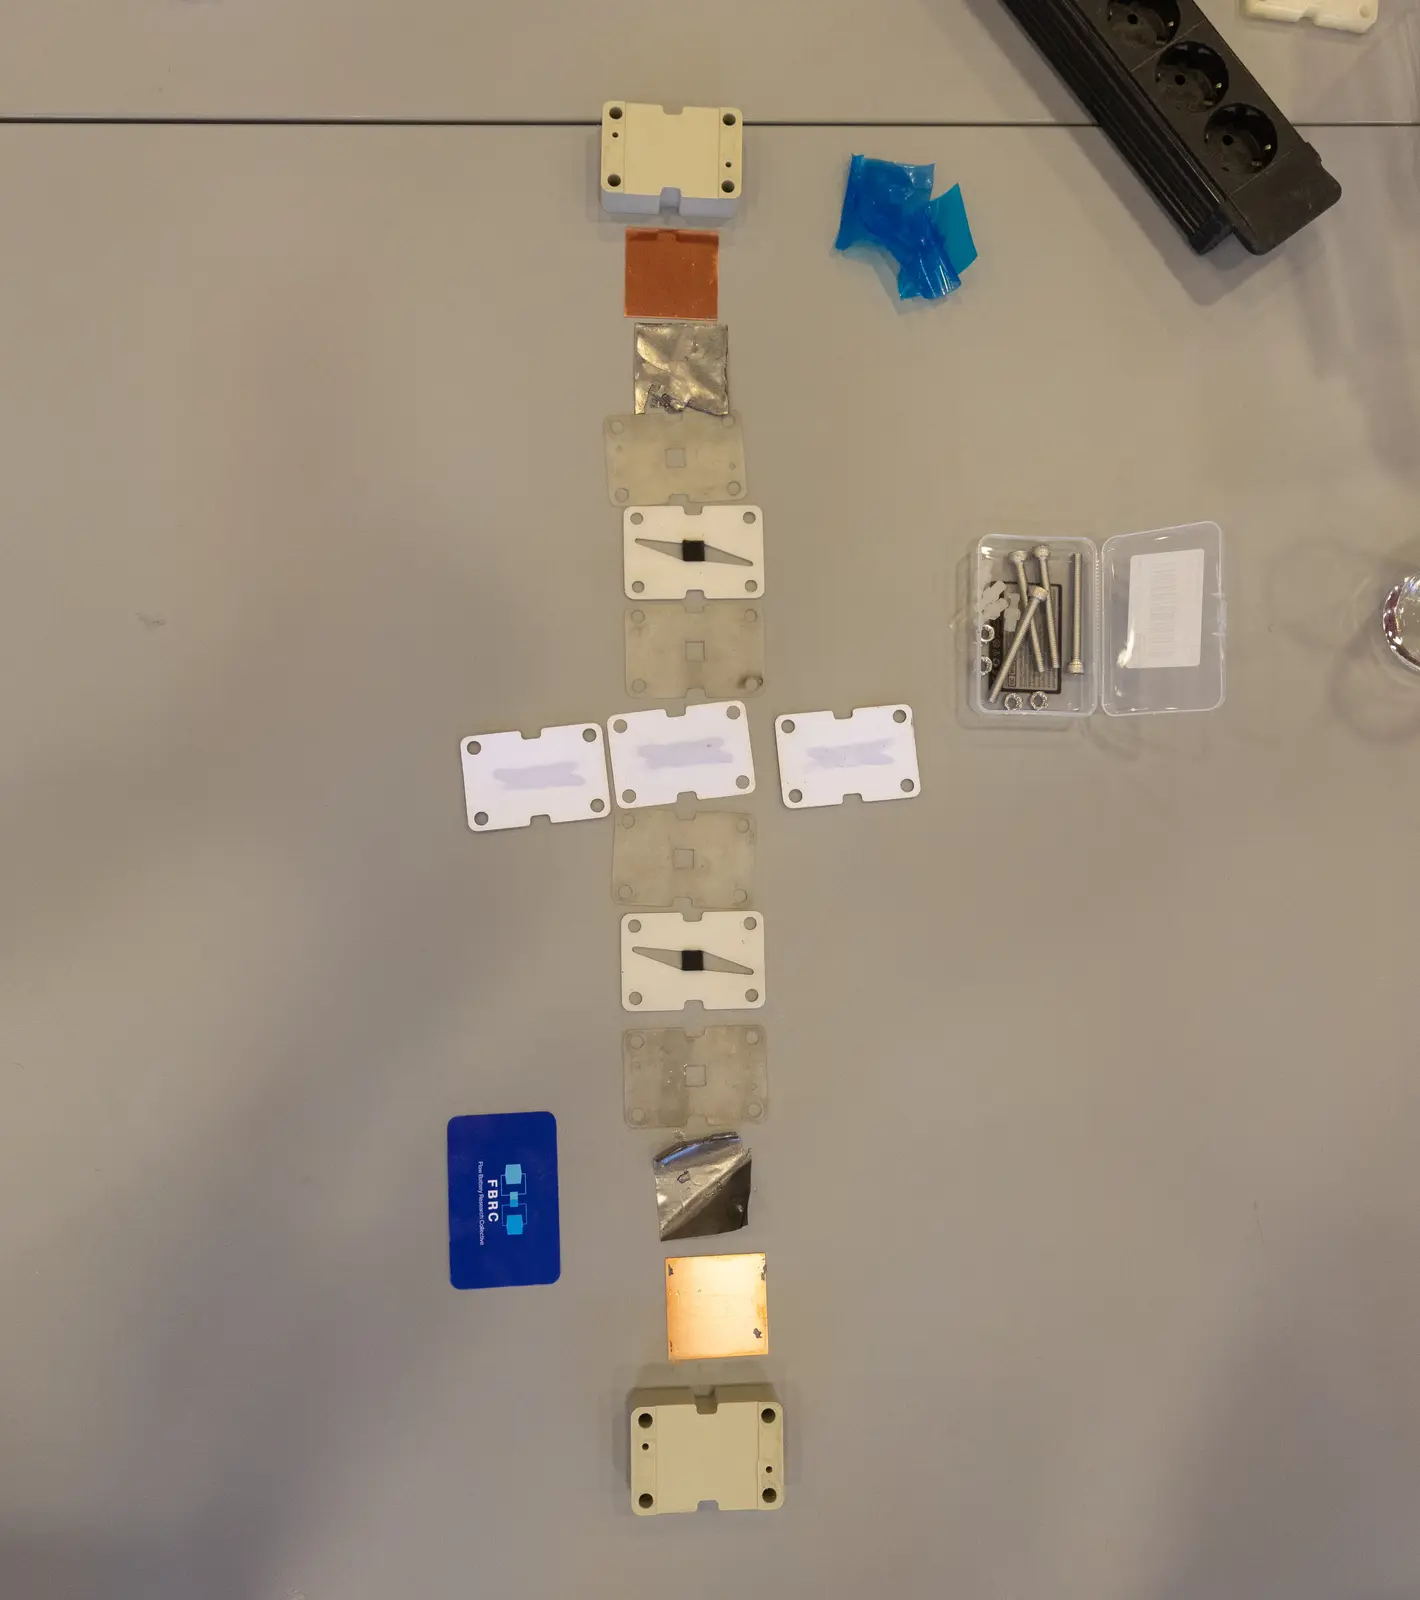 The components of the flow battery test cell individually laid out on a table, arranged in order of assembly